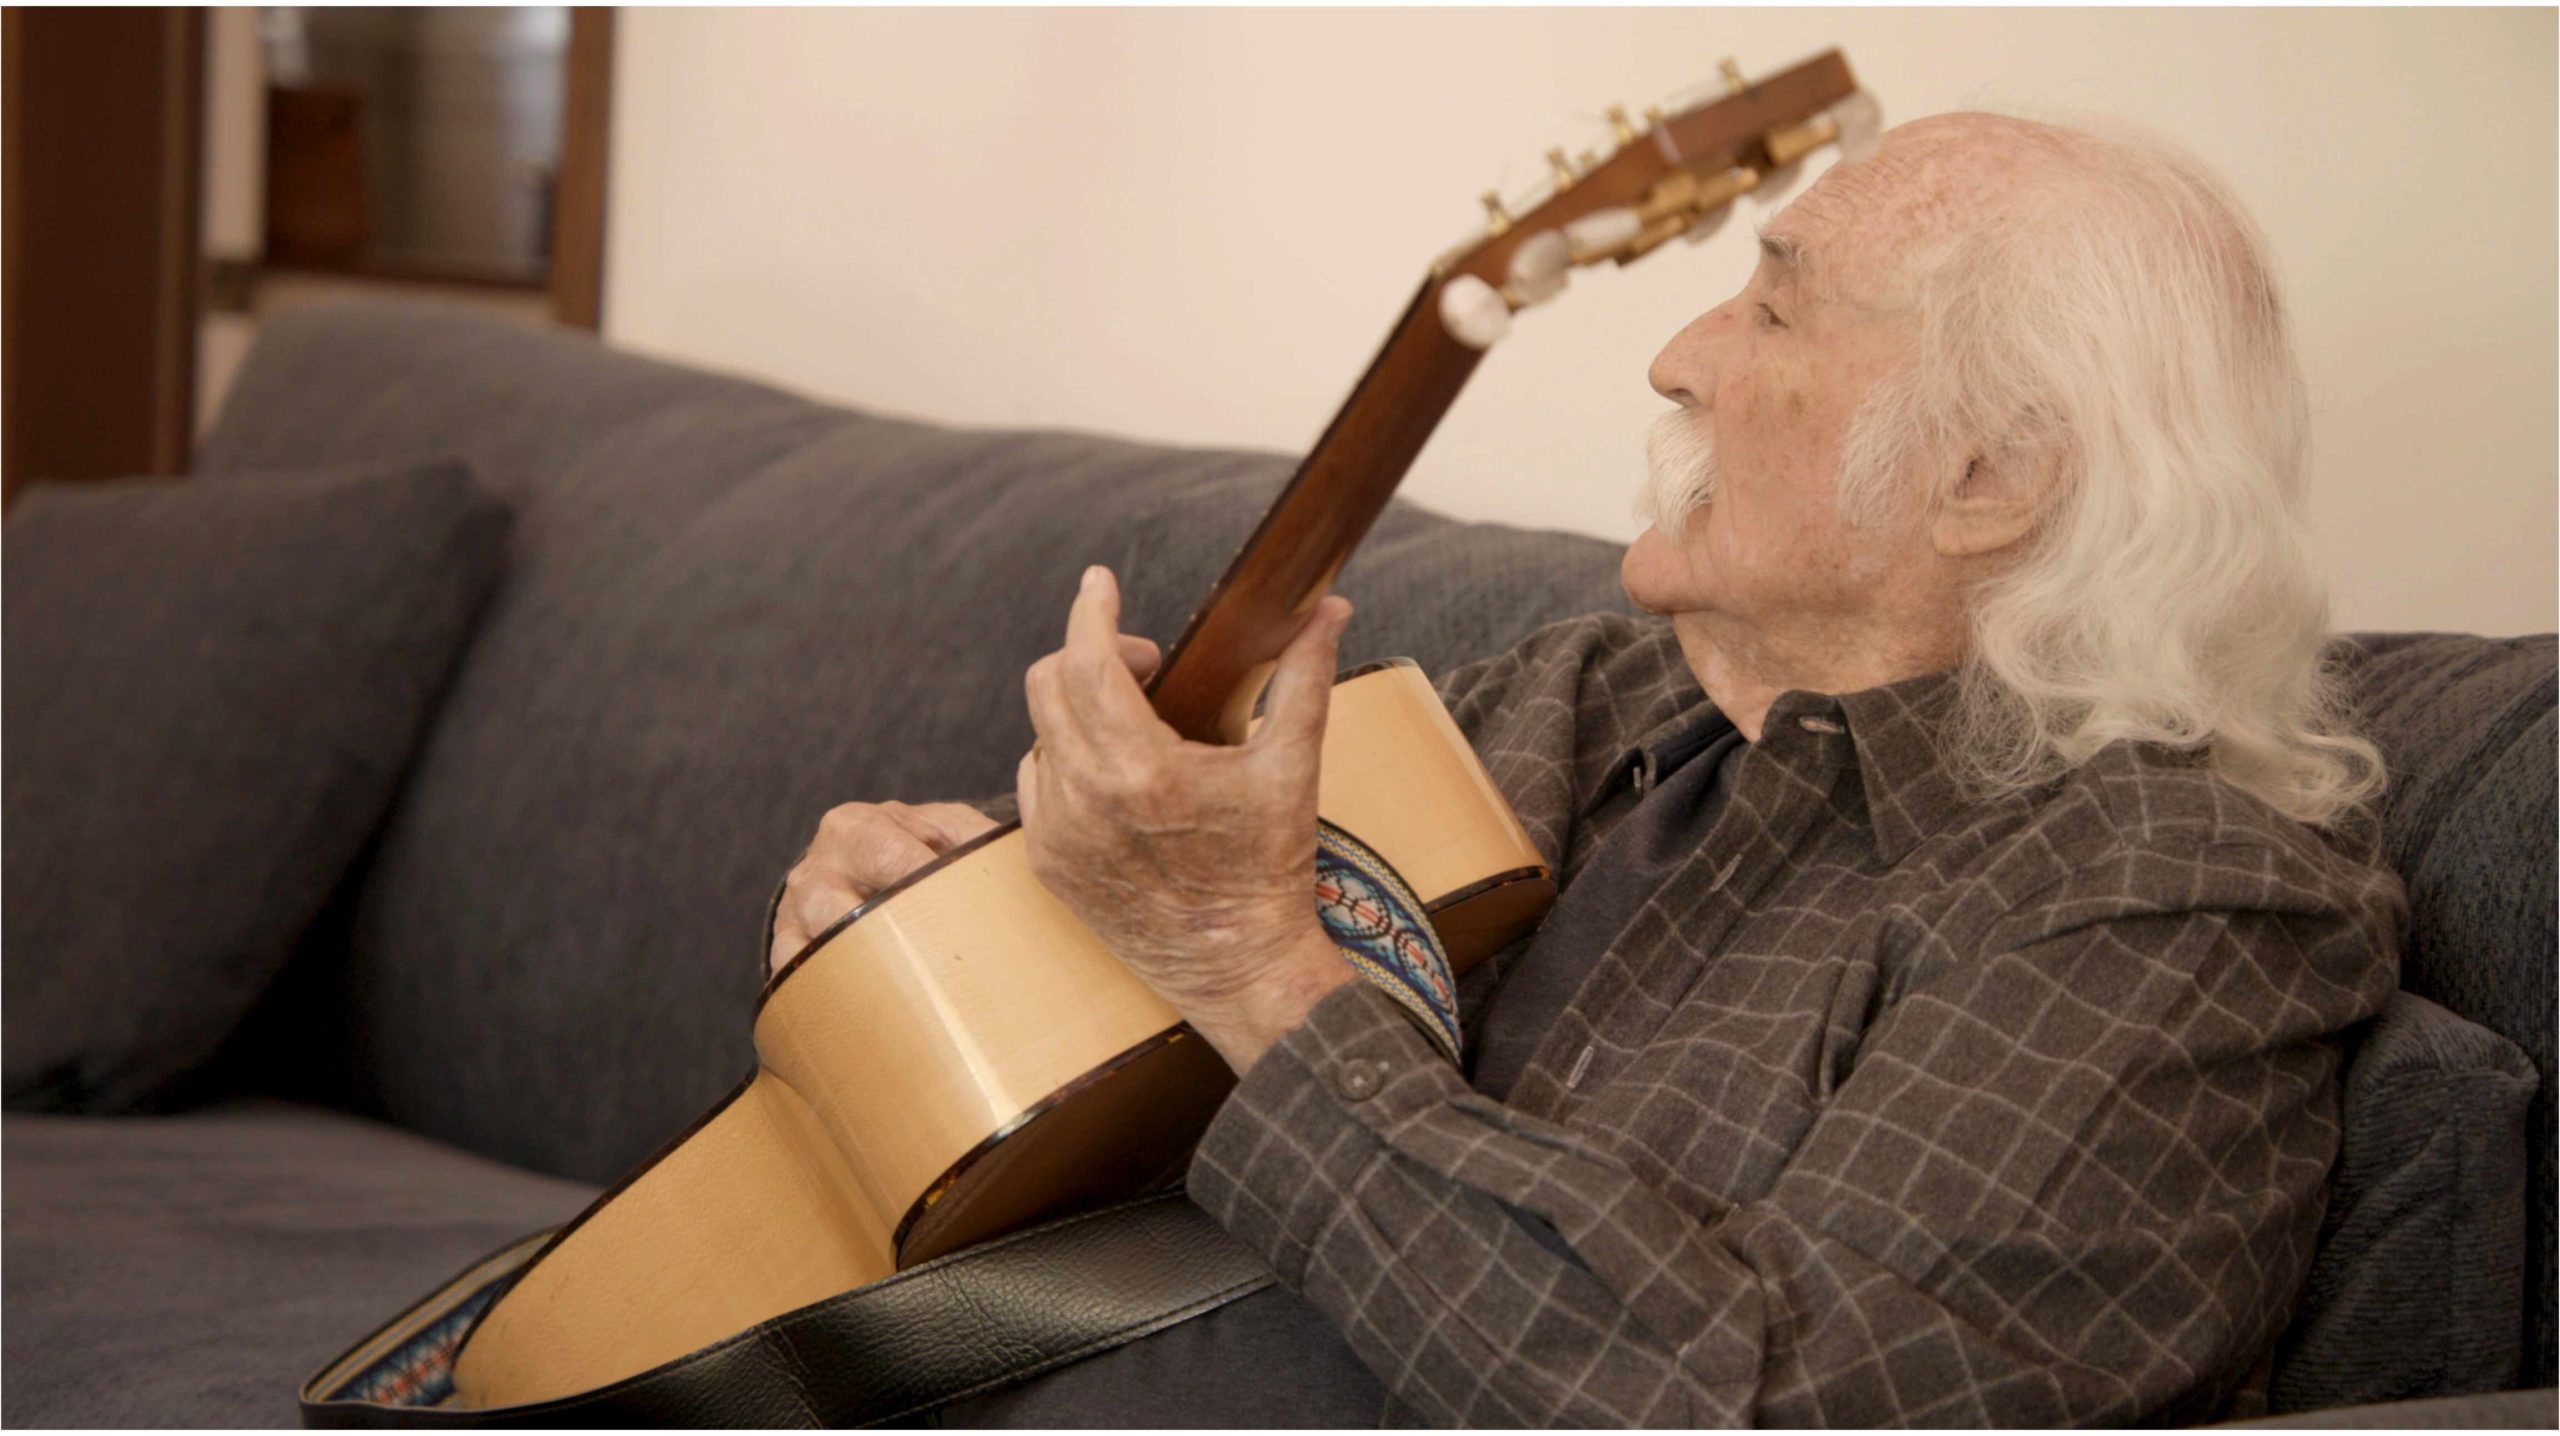 David Crosby plays guitar during documentary interview (Photo Credit: Jeremy Belanger)